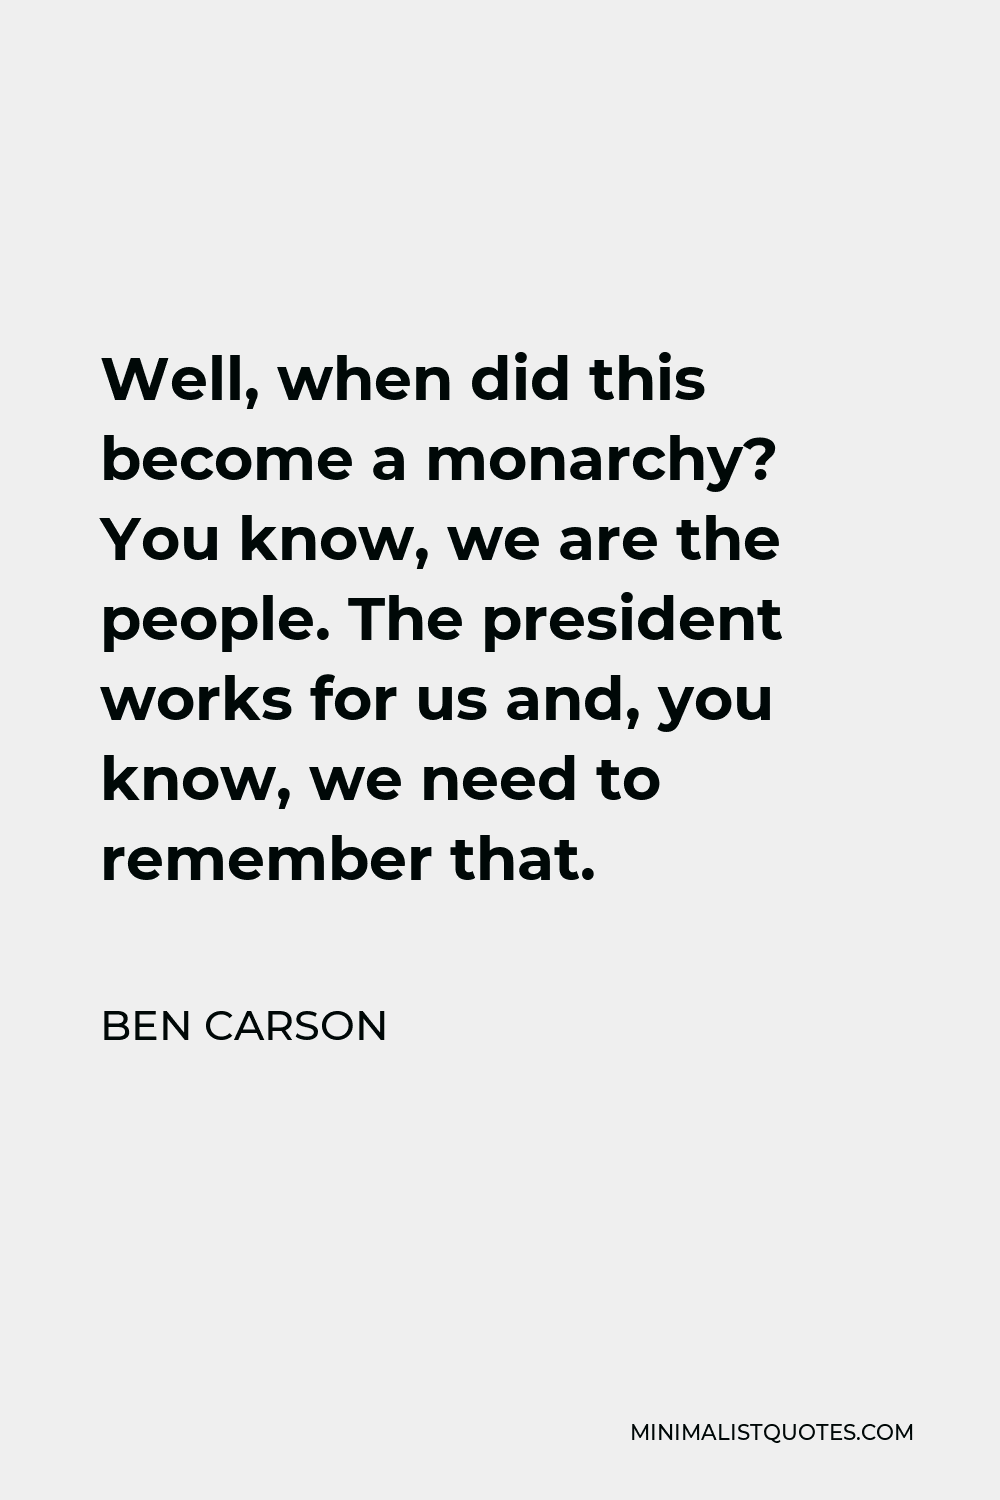 Ben Carson Quote - Well, when did this become a monarchy? You know, we are the people. The president works for us and, you know, we need to remember that.